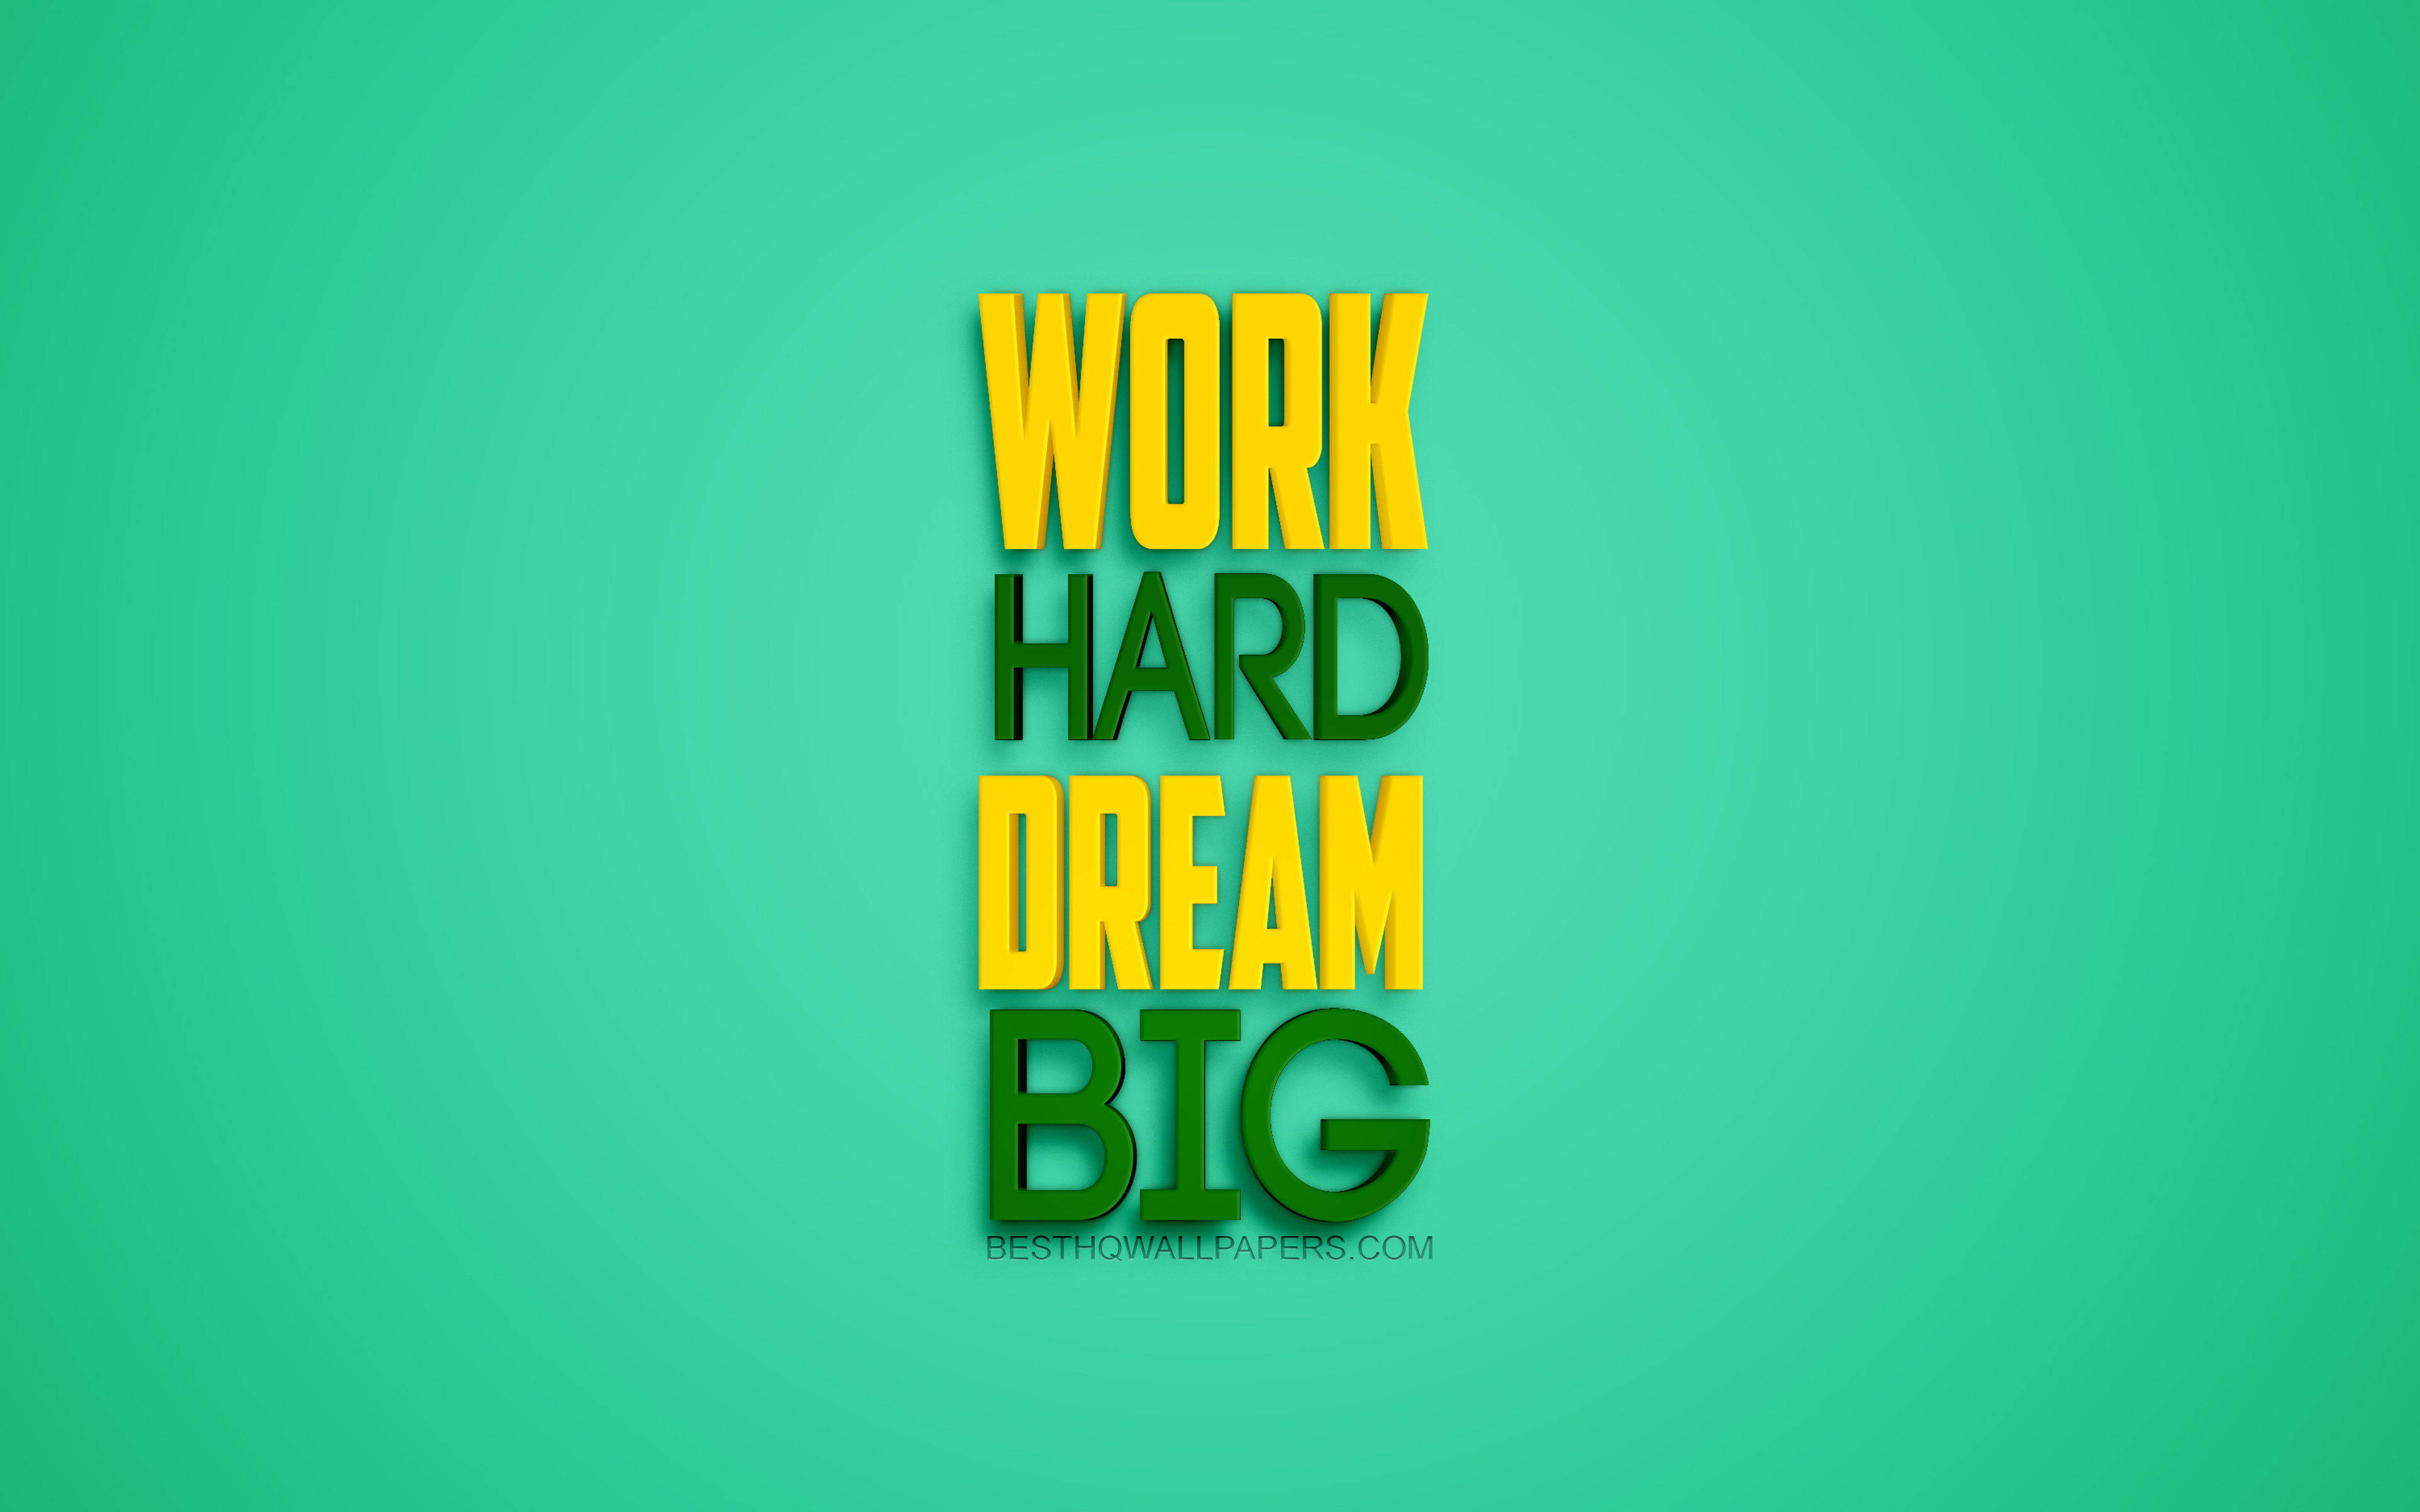 Download wallpaper Work Hard Dream Big, motivation quotes, short quotes, inspiration, green background, 3D art, 3D letters for desktop with resolution 3840x2400. High Quality HD picture wallpaper